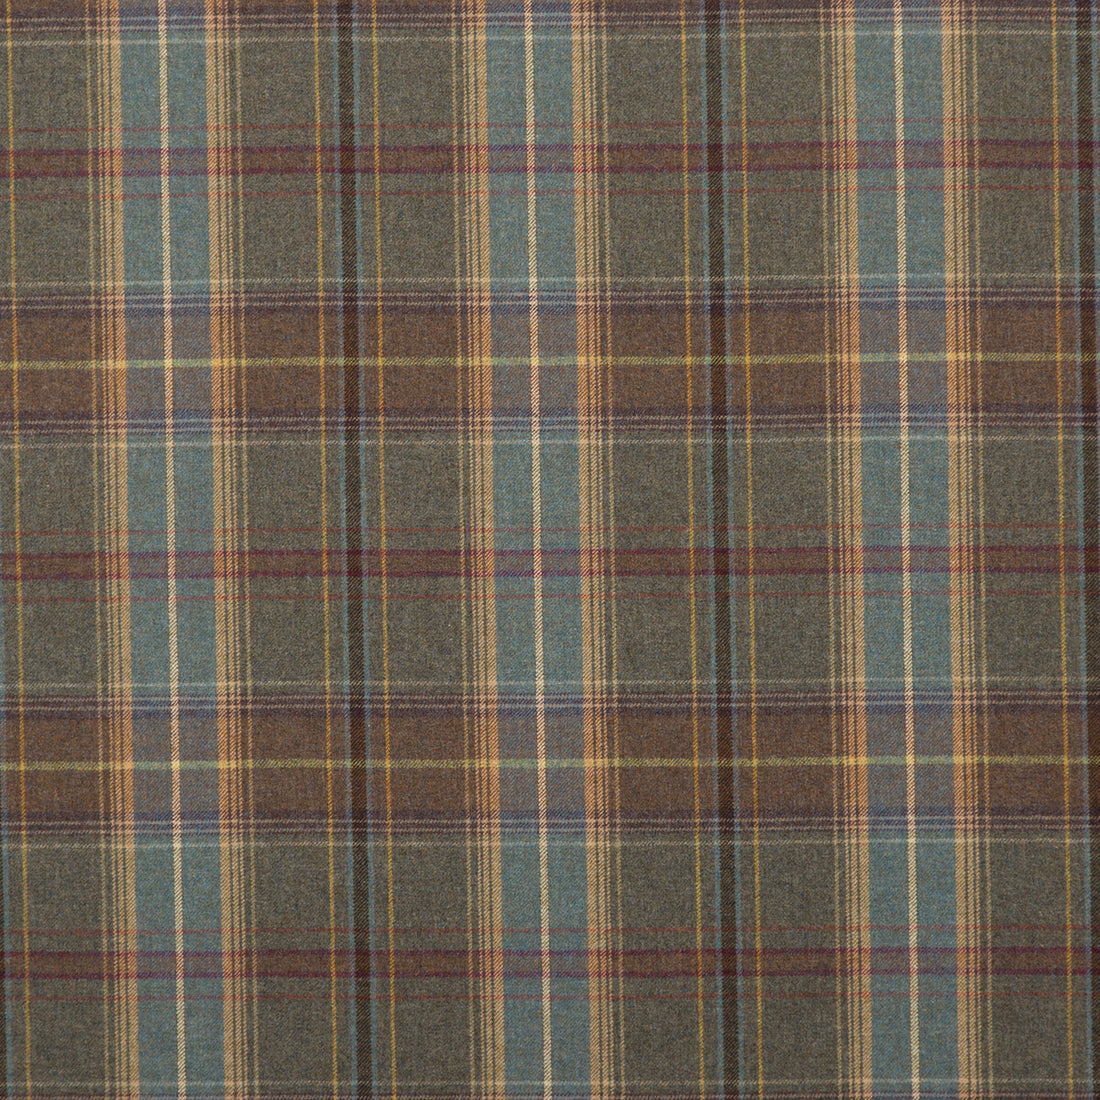 Shetland Plaid fabric in heather color - pattern FD344.A103.0 - by Mulberry in the Bohemian Romance collection